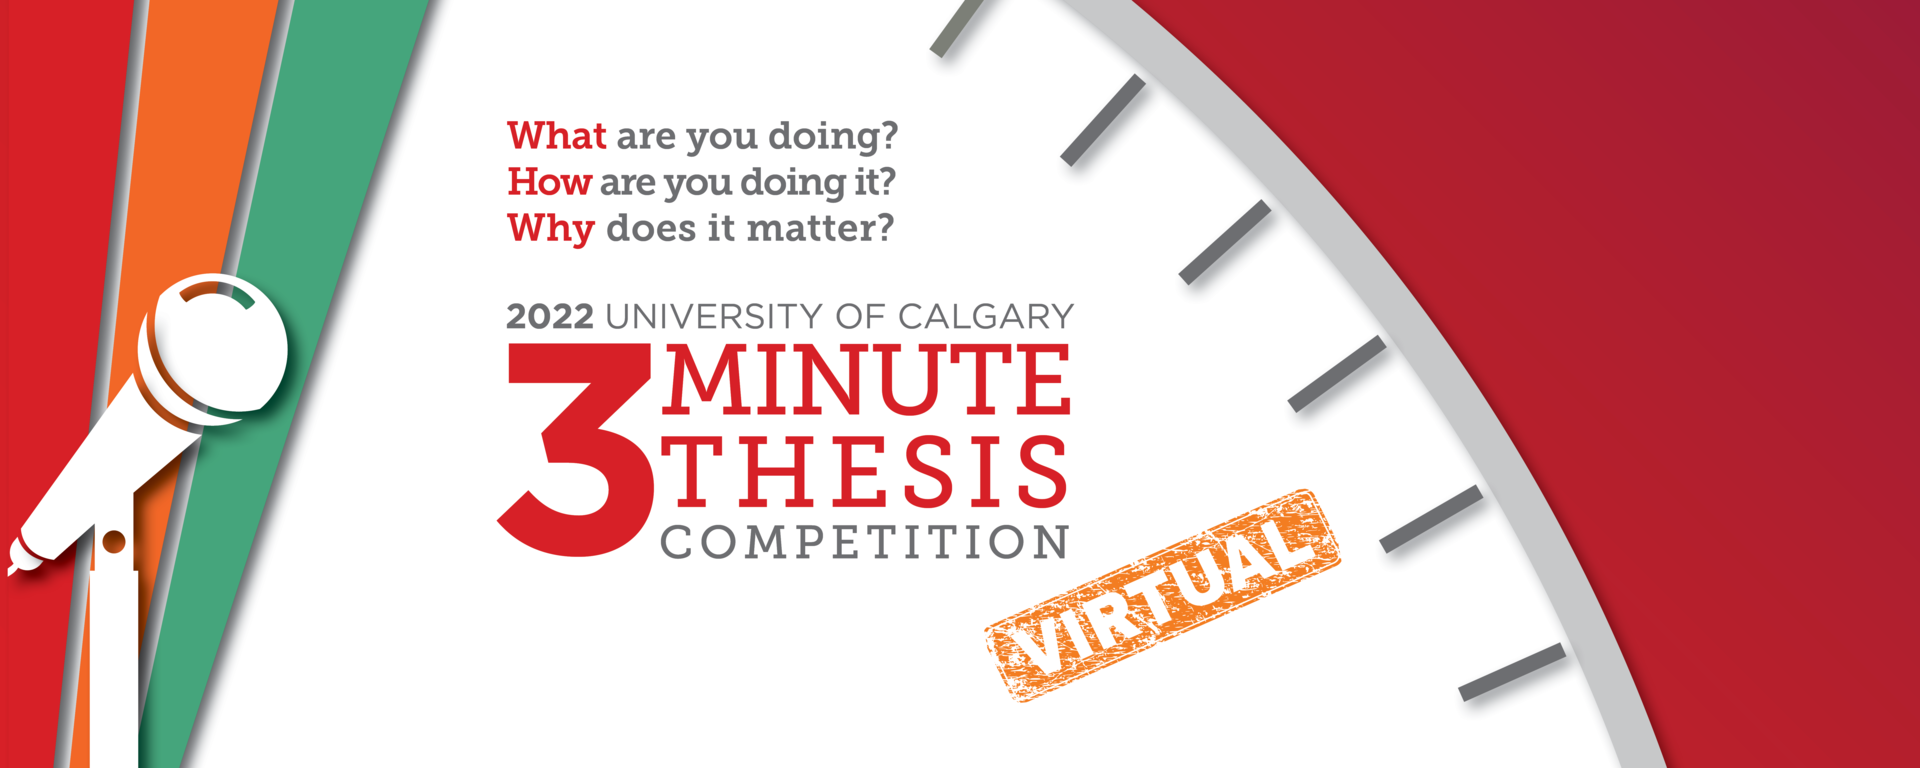 Three Minute Thesis banner for the 2022 UCalgary competition